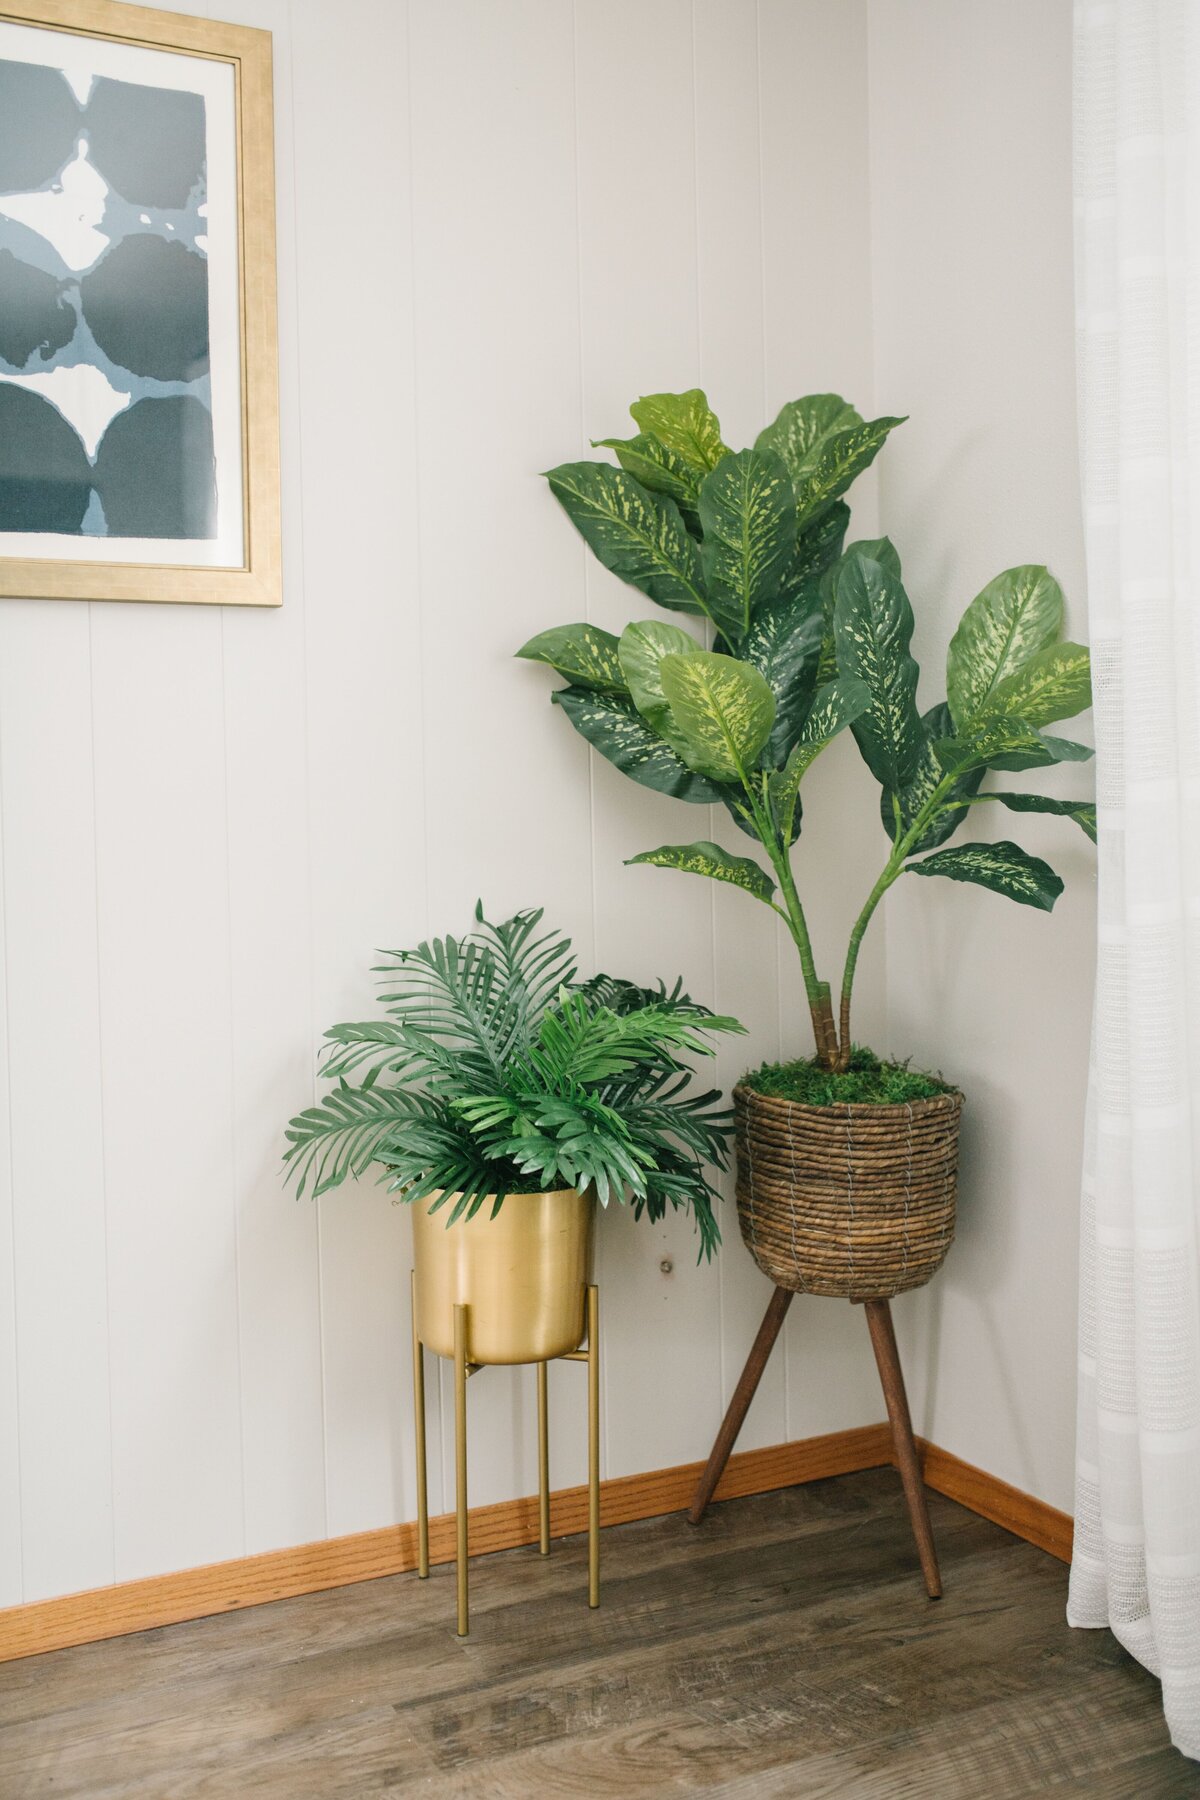 Two potted plants sit in plant stands in the corner of a living room